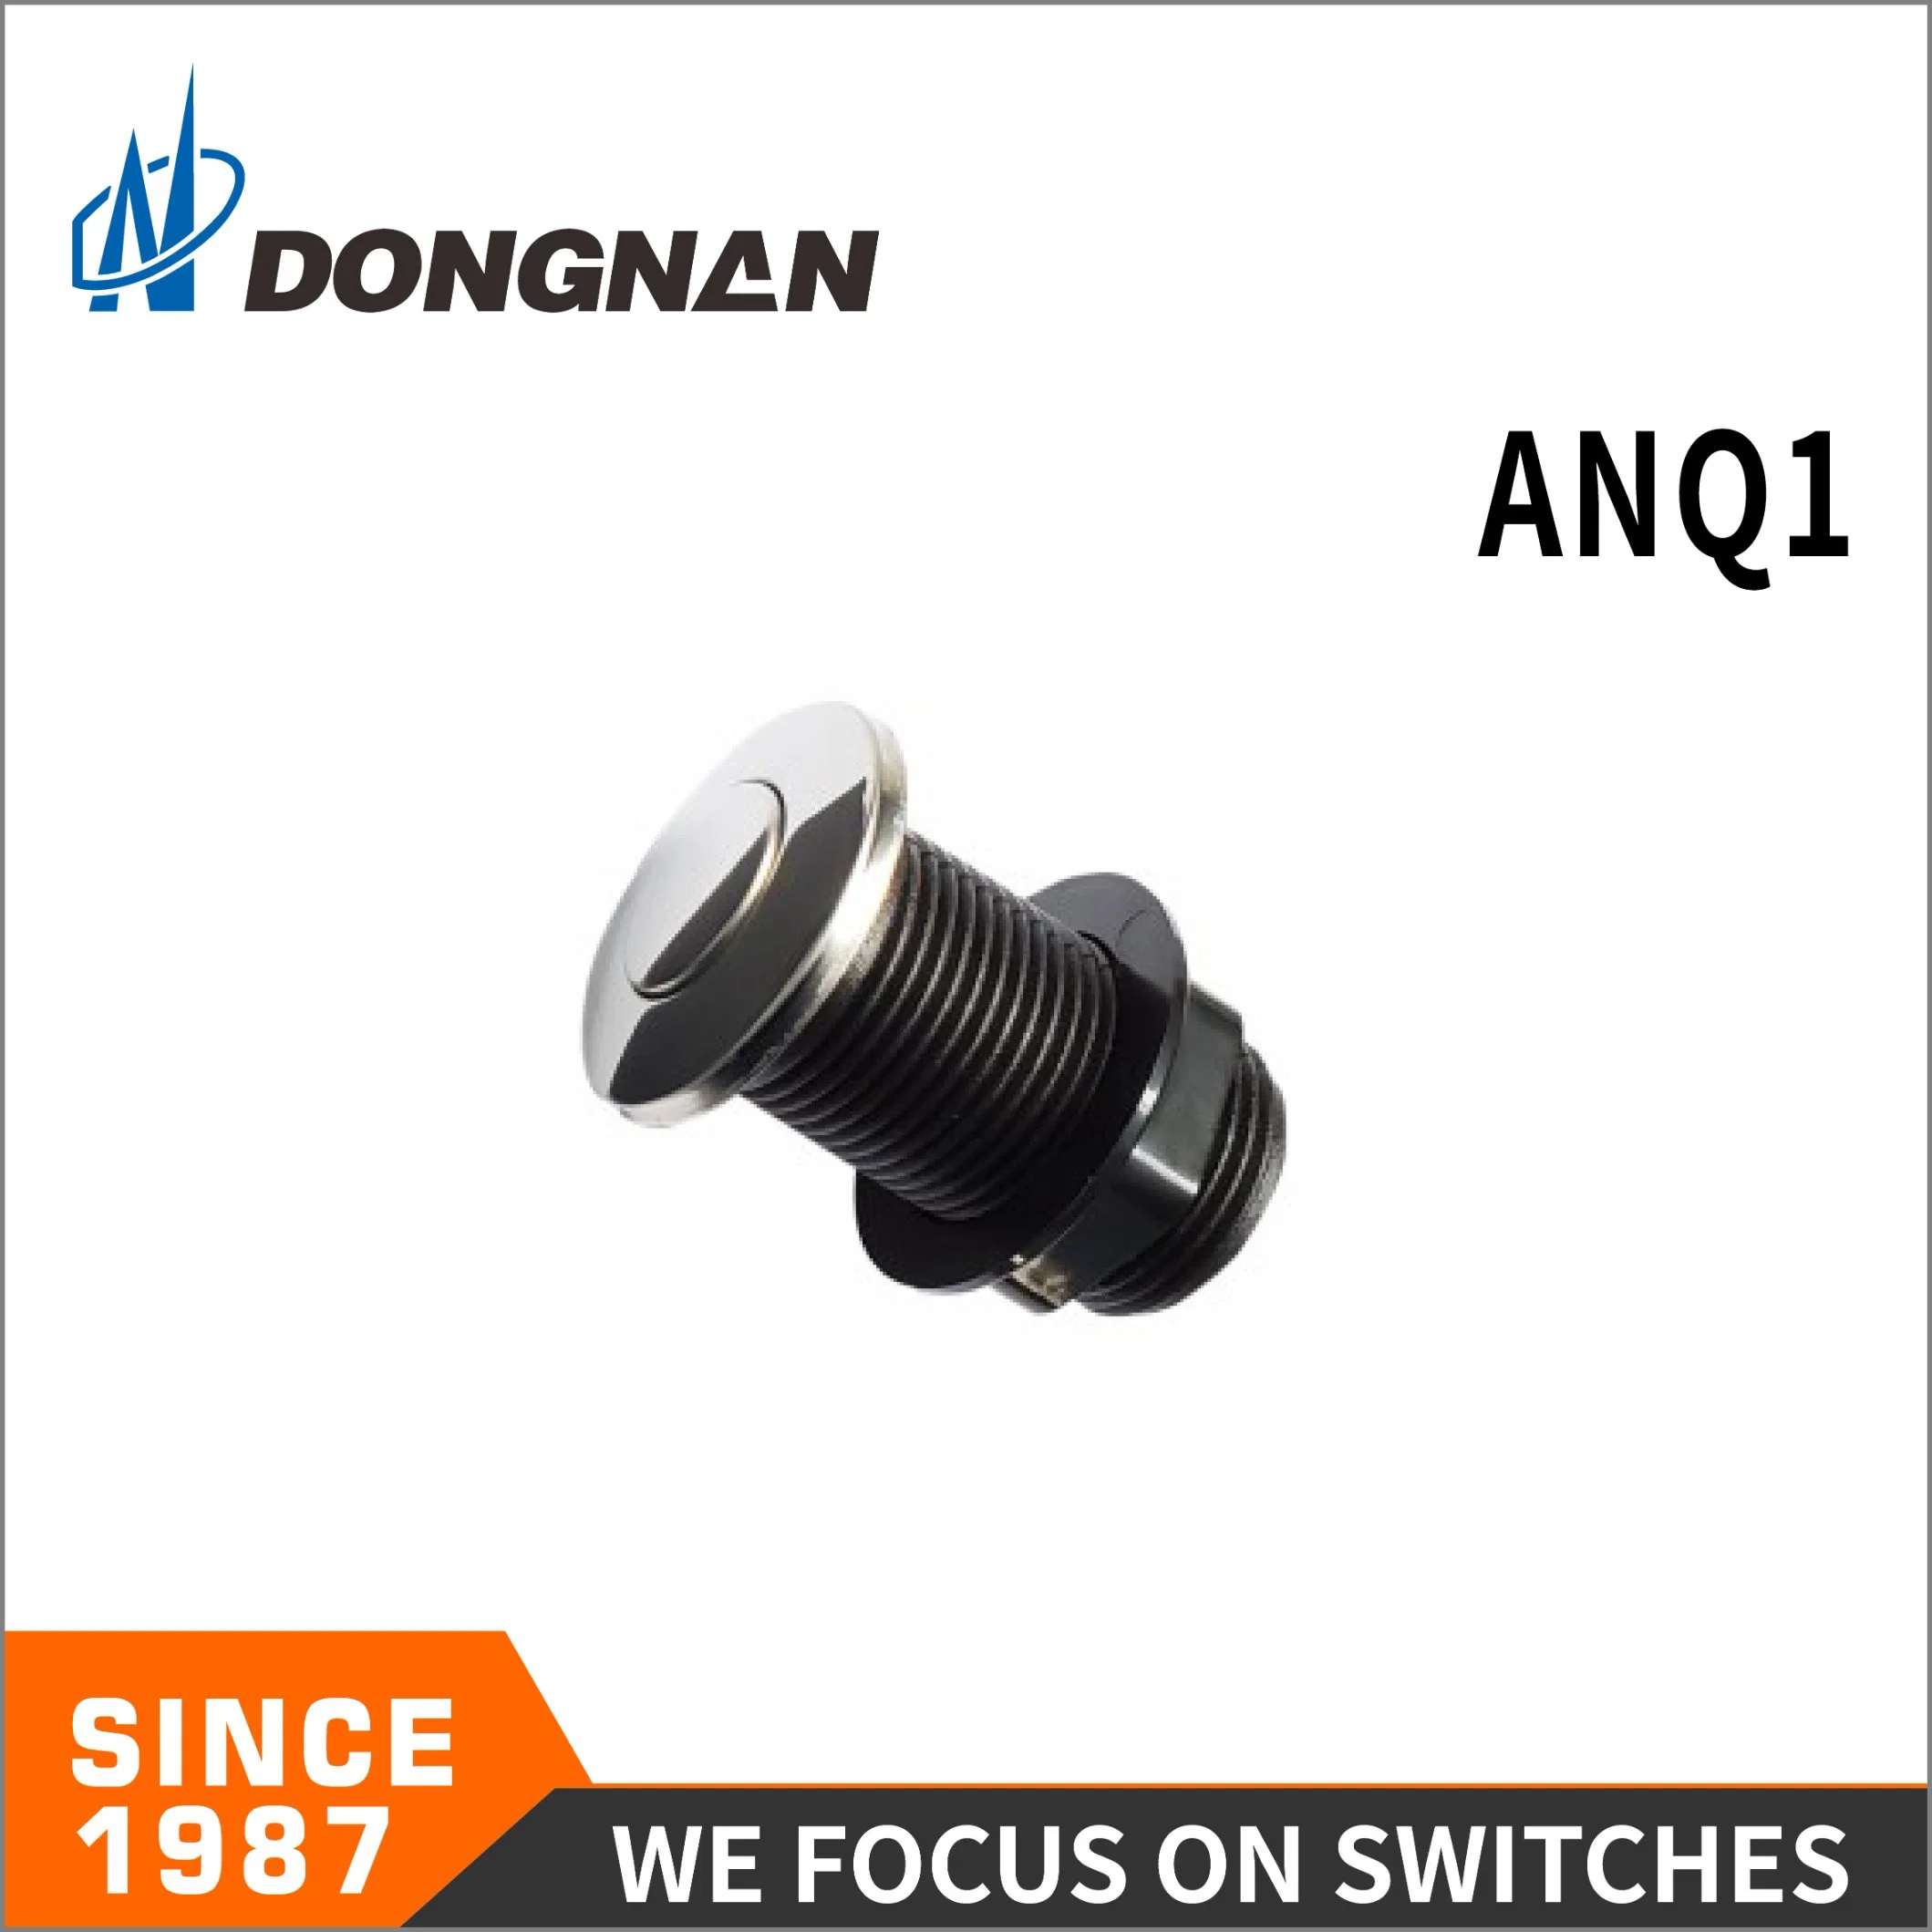 Dongnan Anq1 Pneumatic Button Switch with Brass/Steel Cover